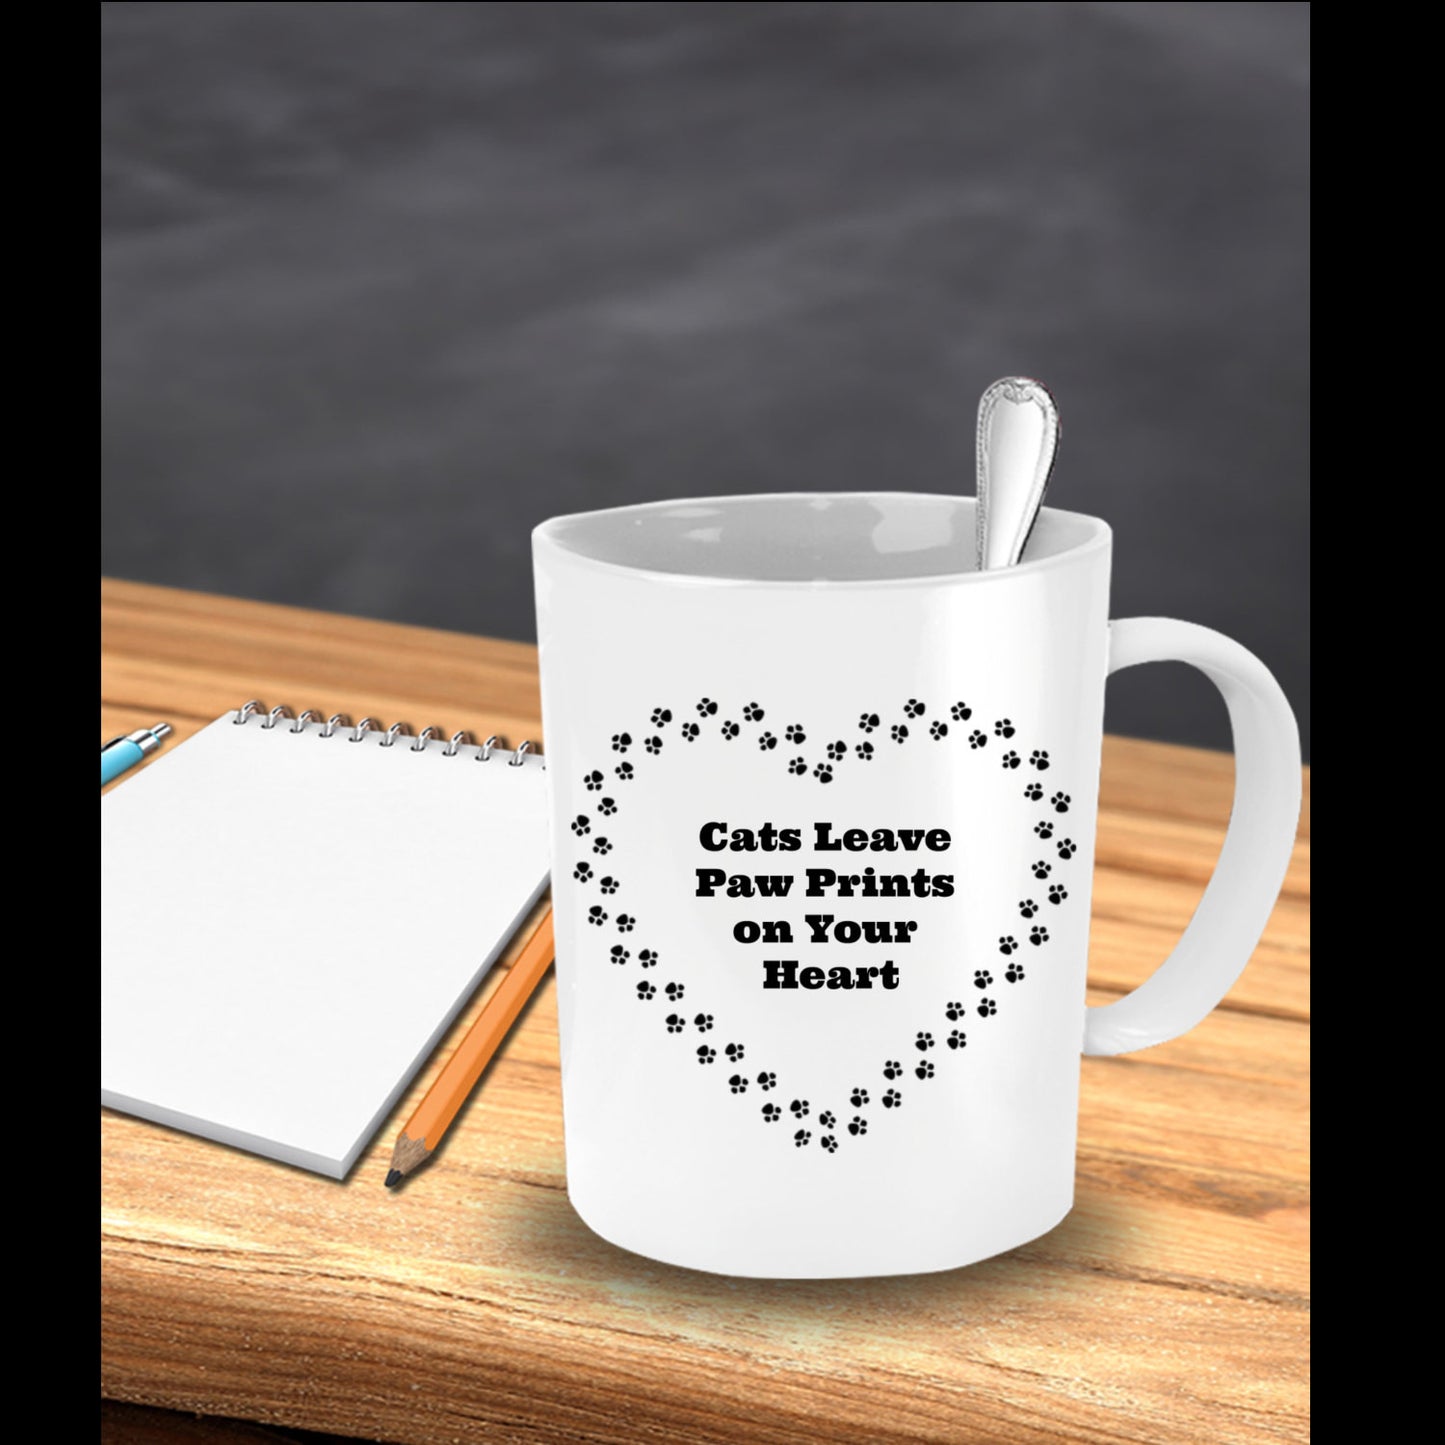 Cats Leave Paw Prints On Your Heart- Novelty Coffee Mug- Cat Owner Lady Gift White Ceramic Cup